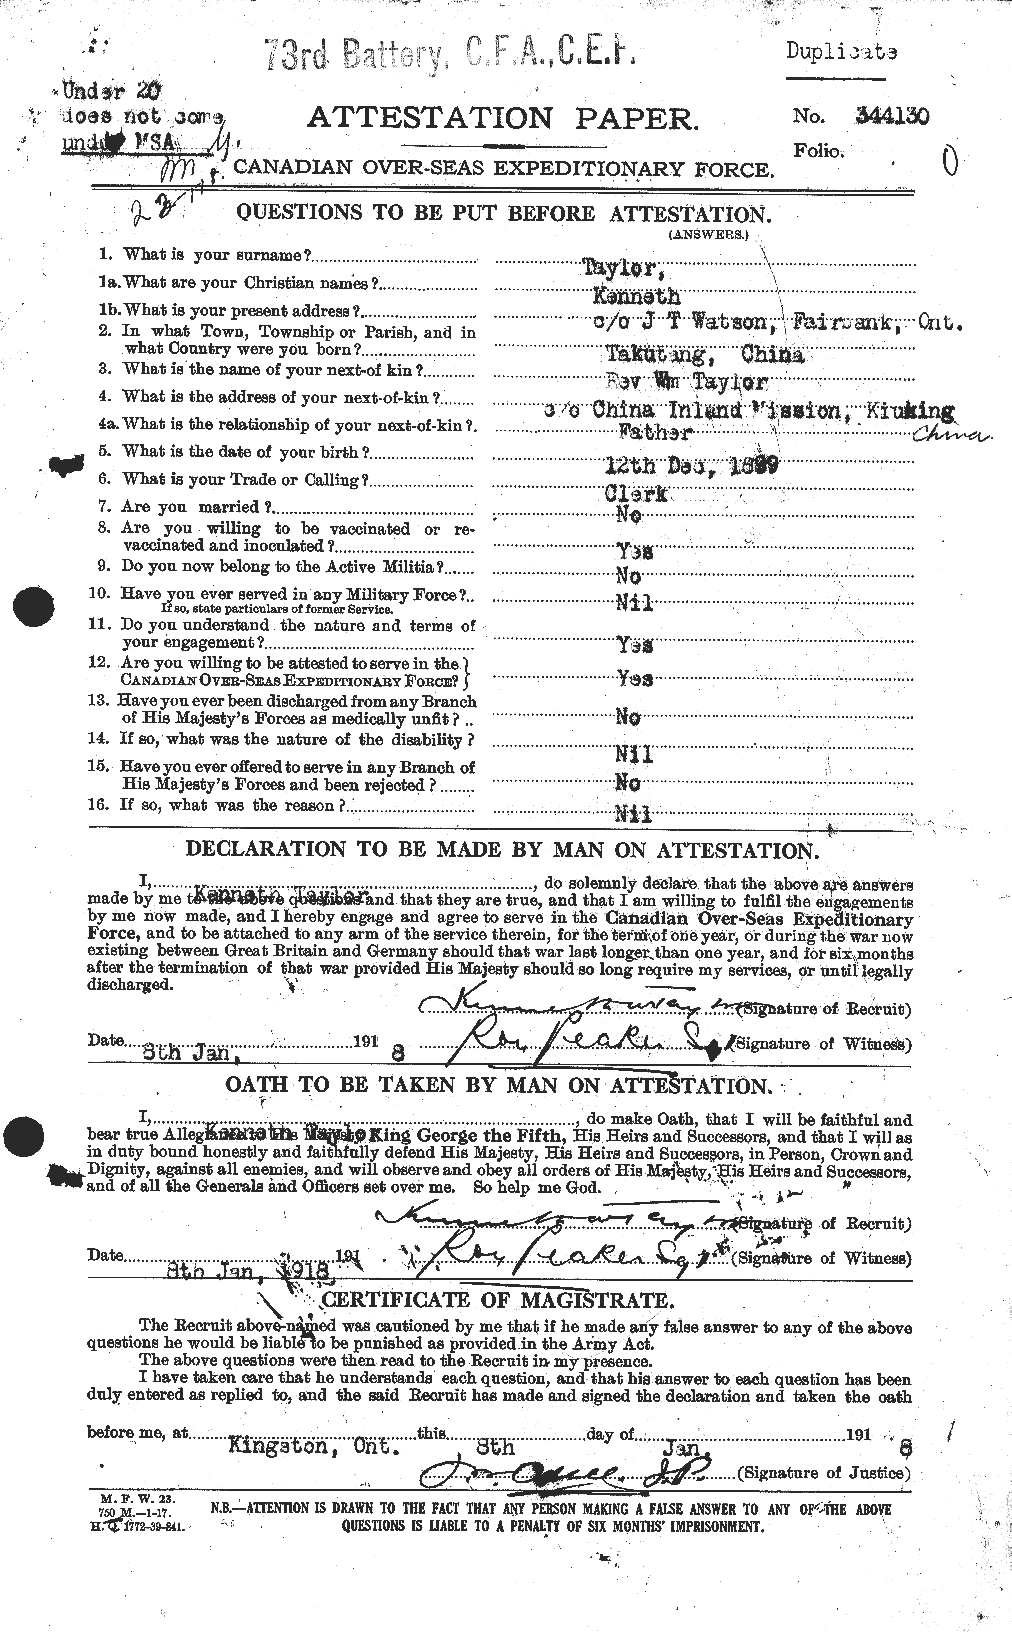 Personnel Records of the First World War - CEF 627594a